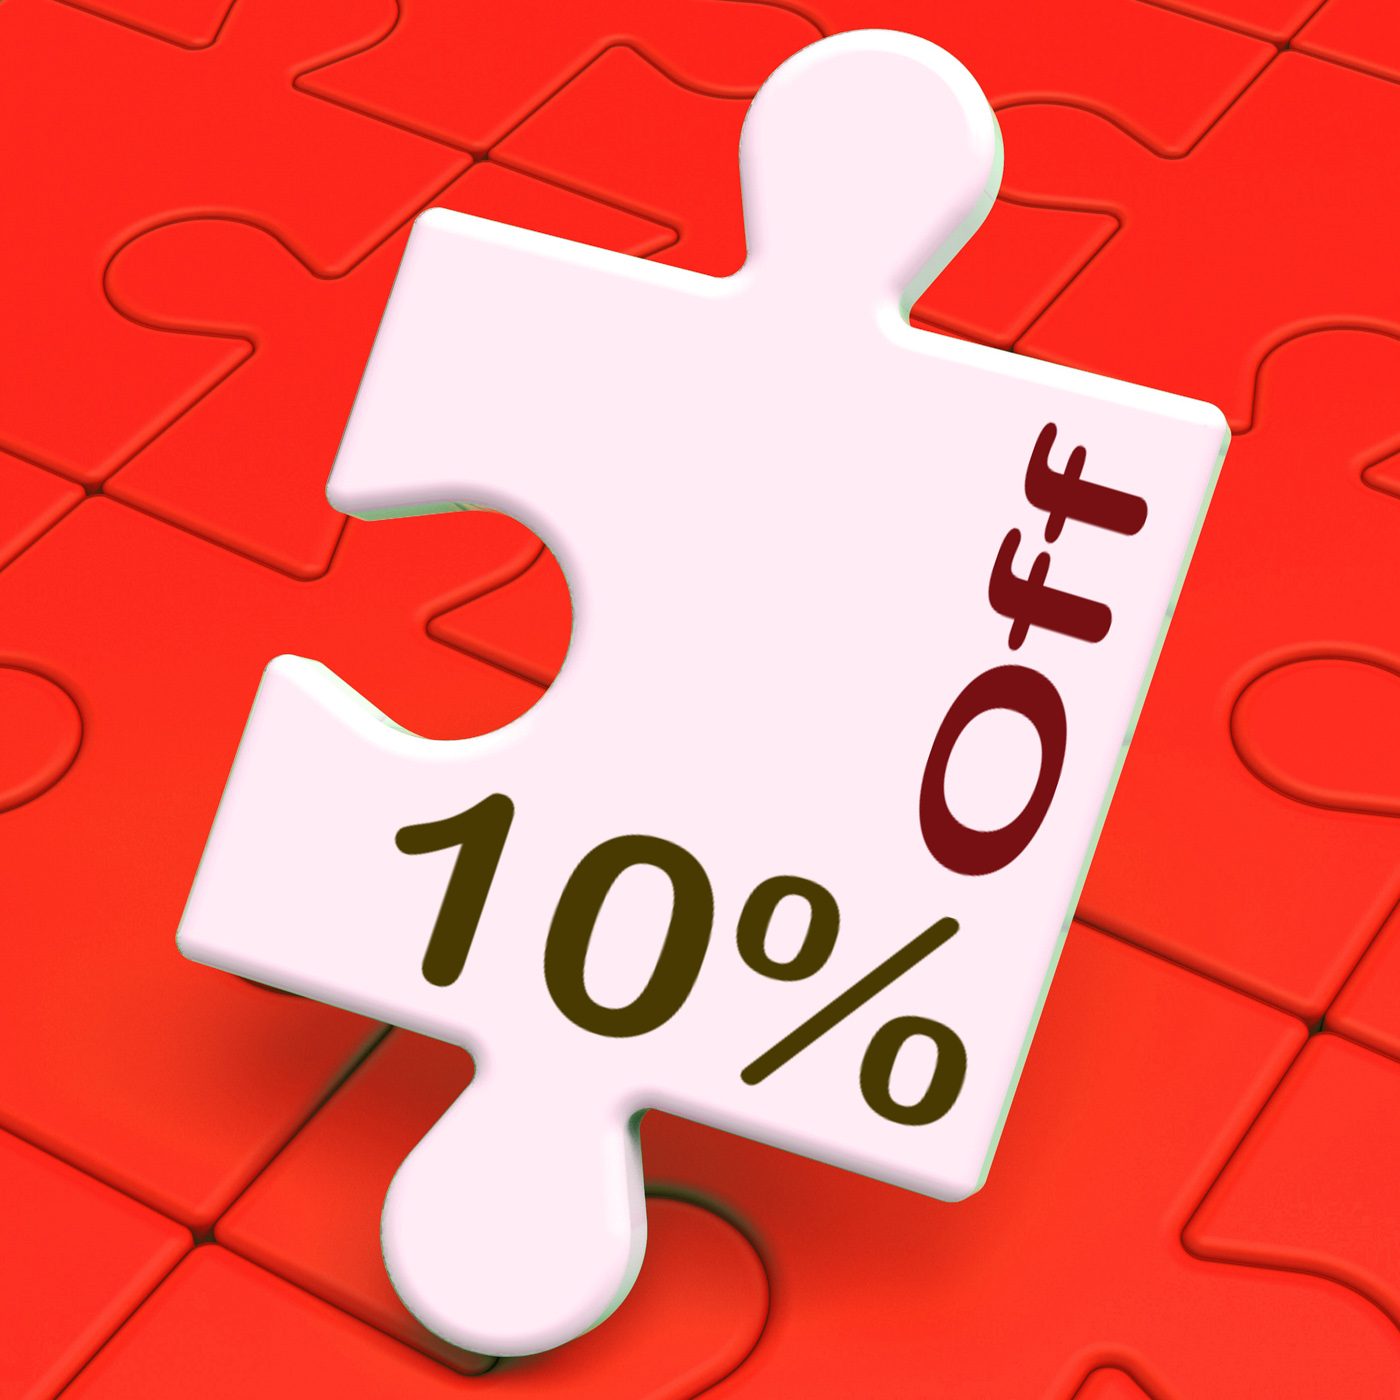 Ten percent off puzzle means reductions or sale photo